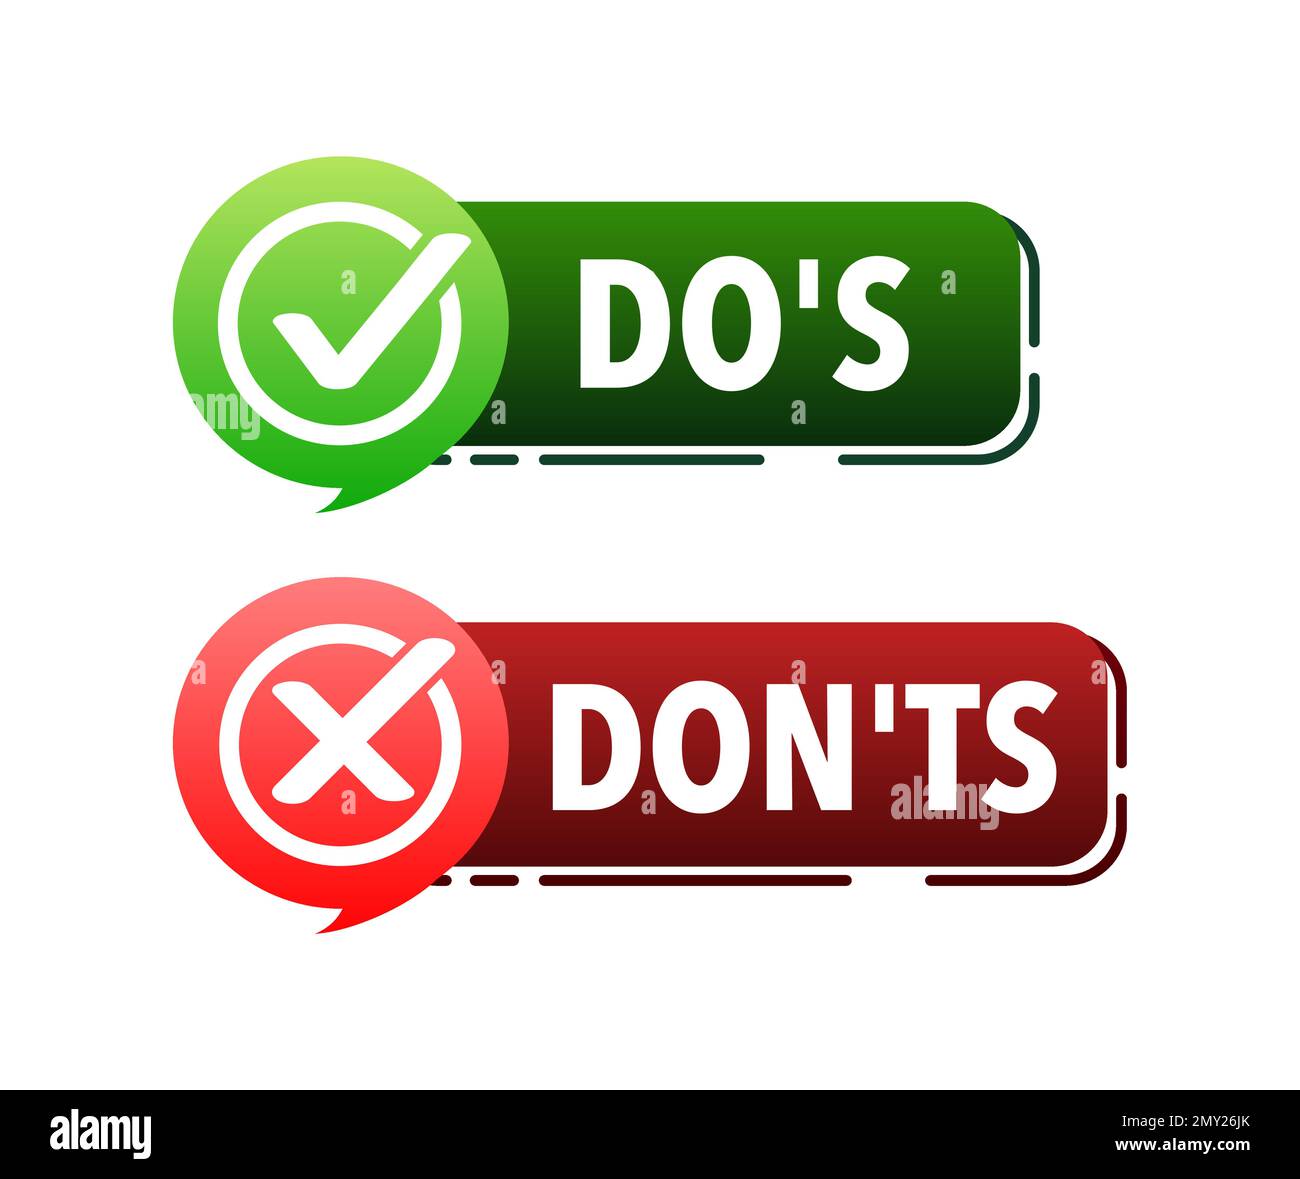 Dos and donts signs. Good and Bad Icon. Positive and negative sign. Stock Vector